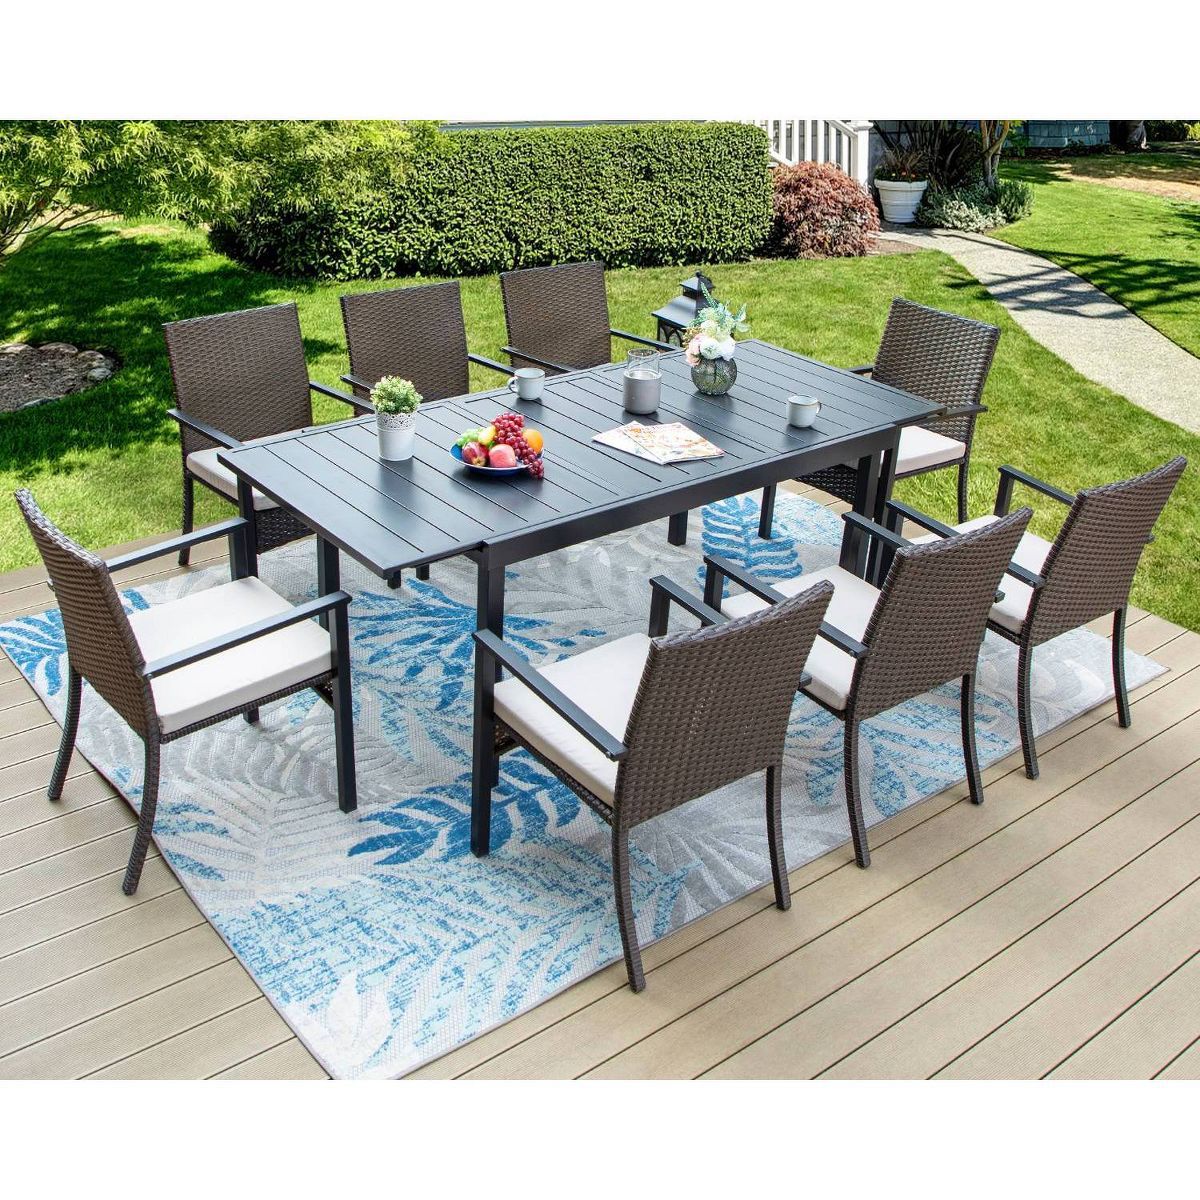 9pc Outdoor Dining Set with Extendable Table & Rattan Wicker Chairs - Beige - Captiva Designs | Target